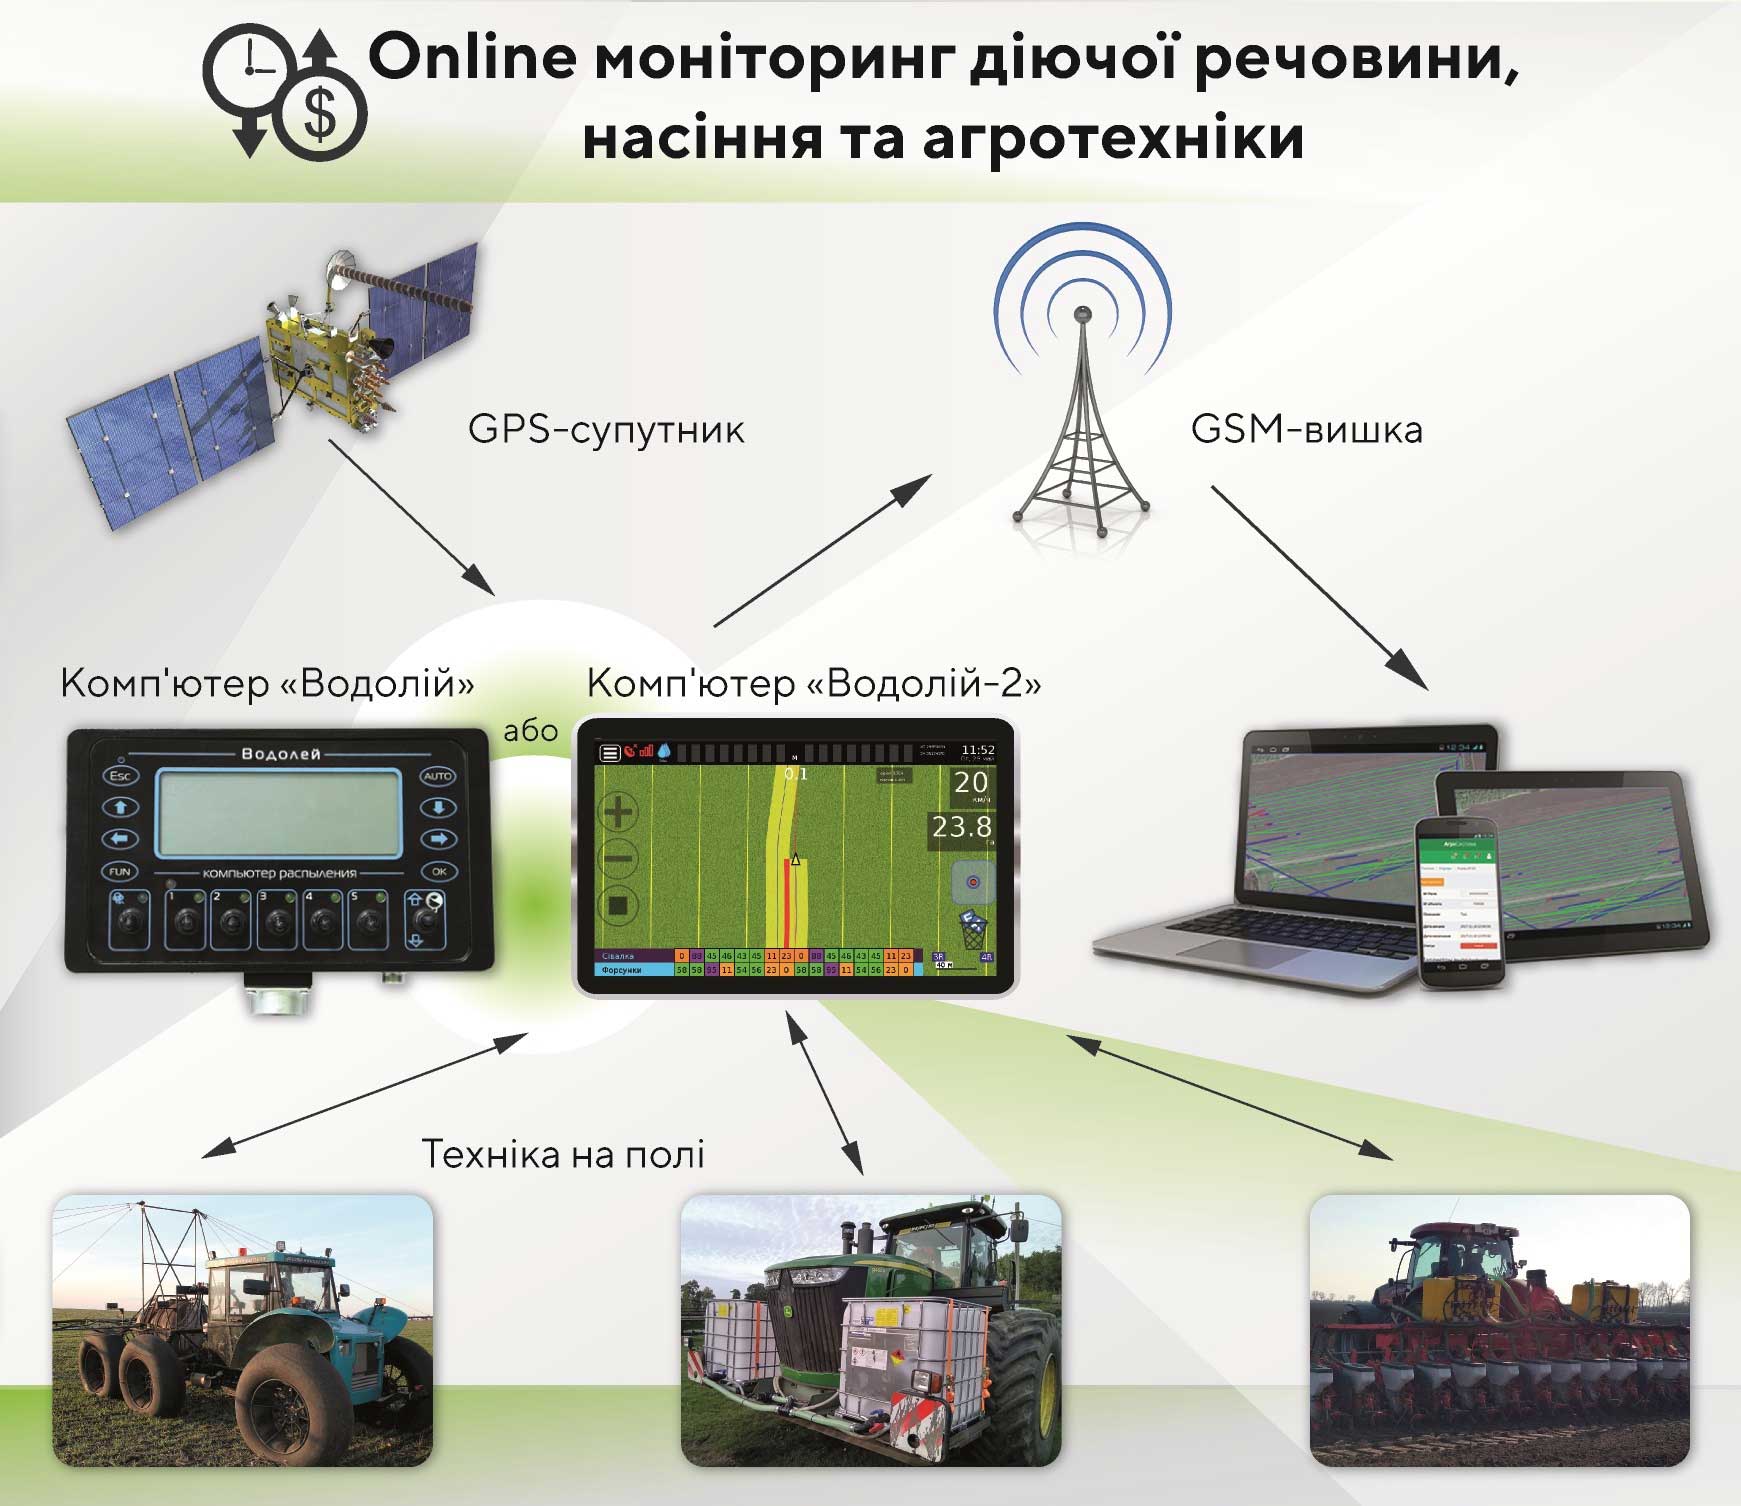 Principle of operation of the Agro-system